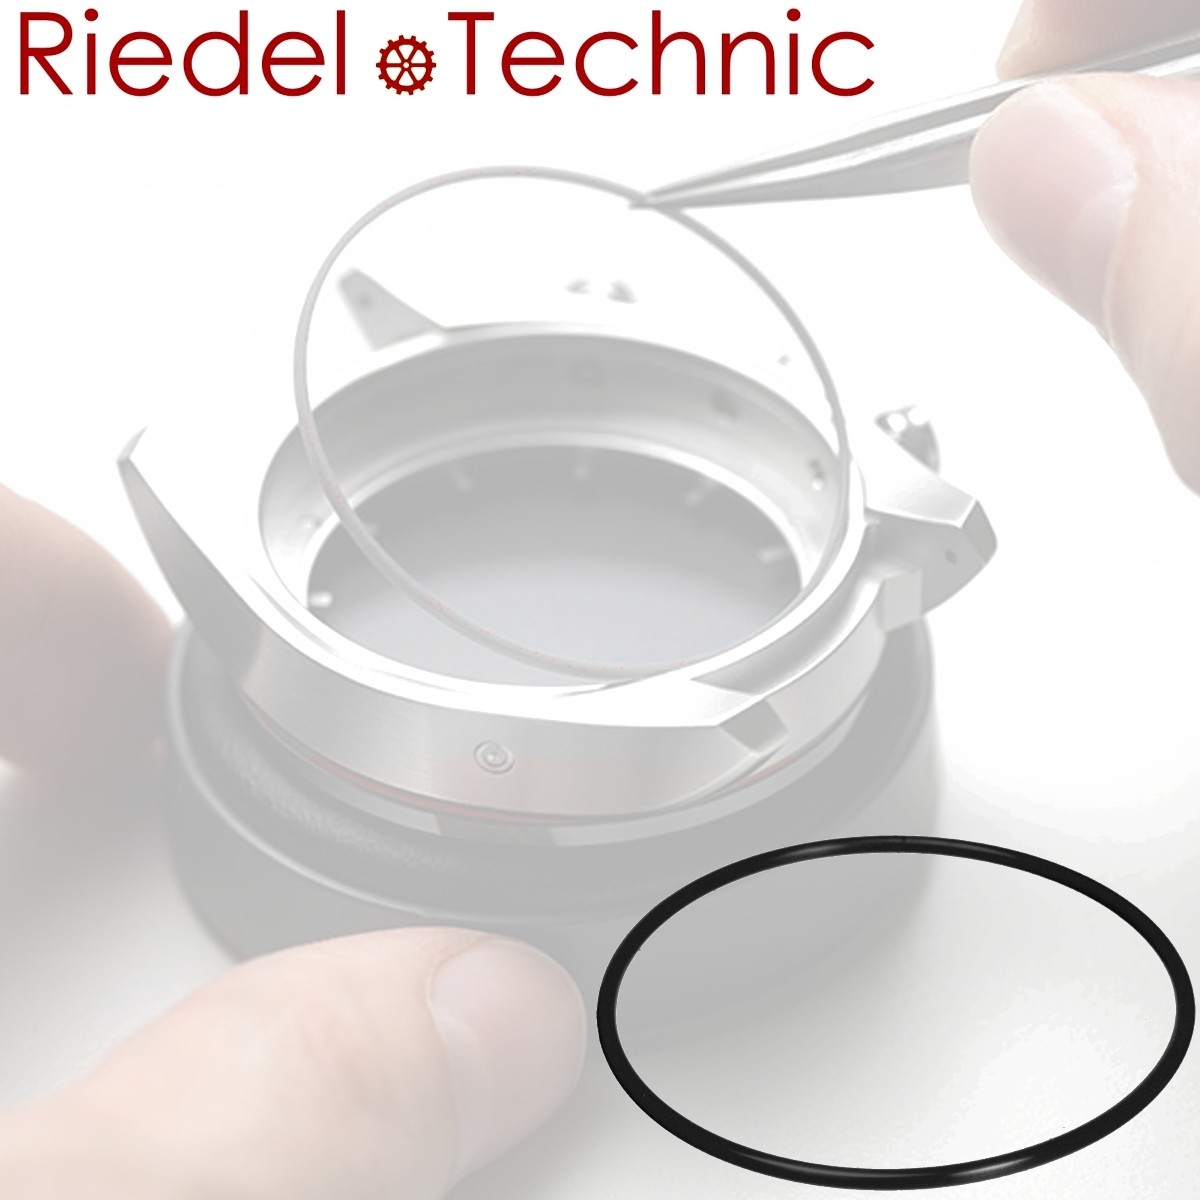 show original title Details about   Large Set Round Seal Rings Riedel Technic duofil 0.6 